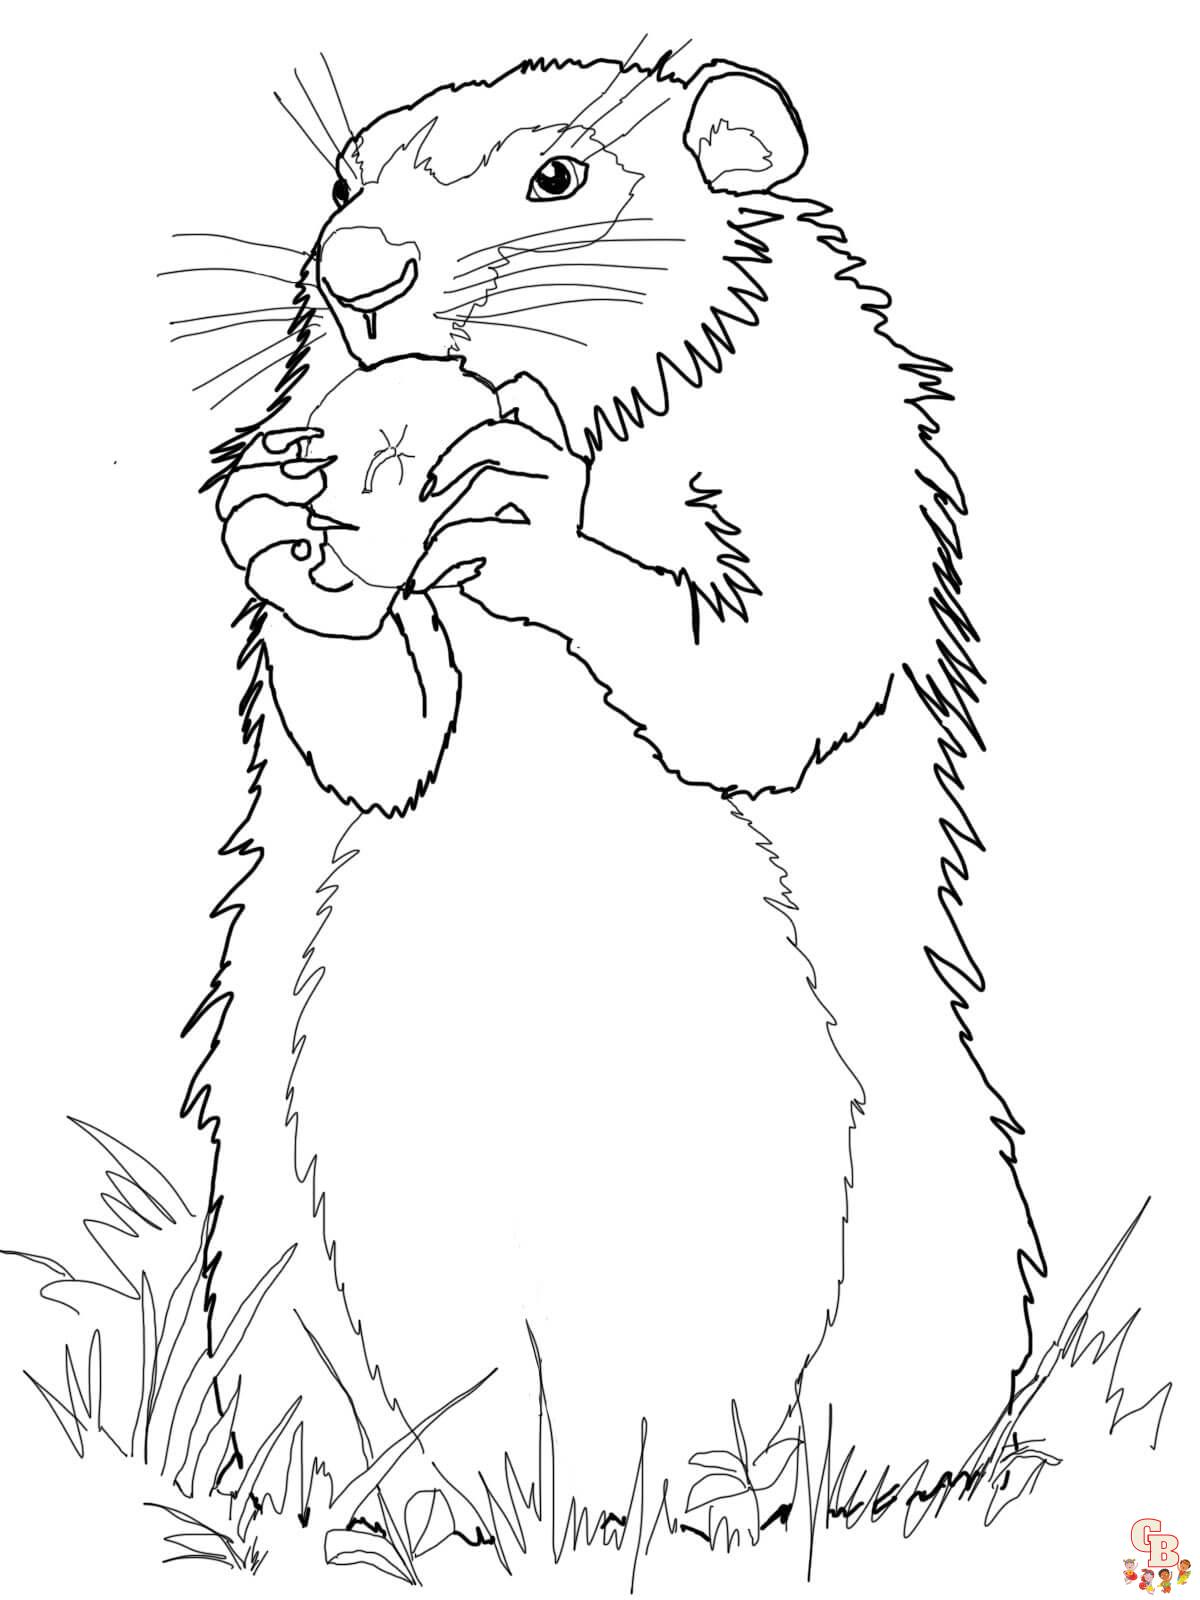 Groundhog coloring pages creative and educational fun for kids